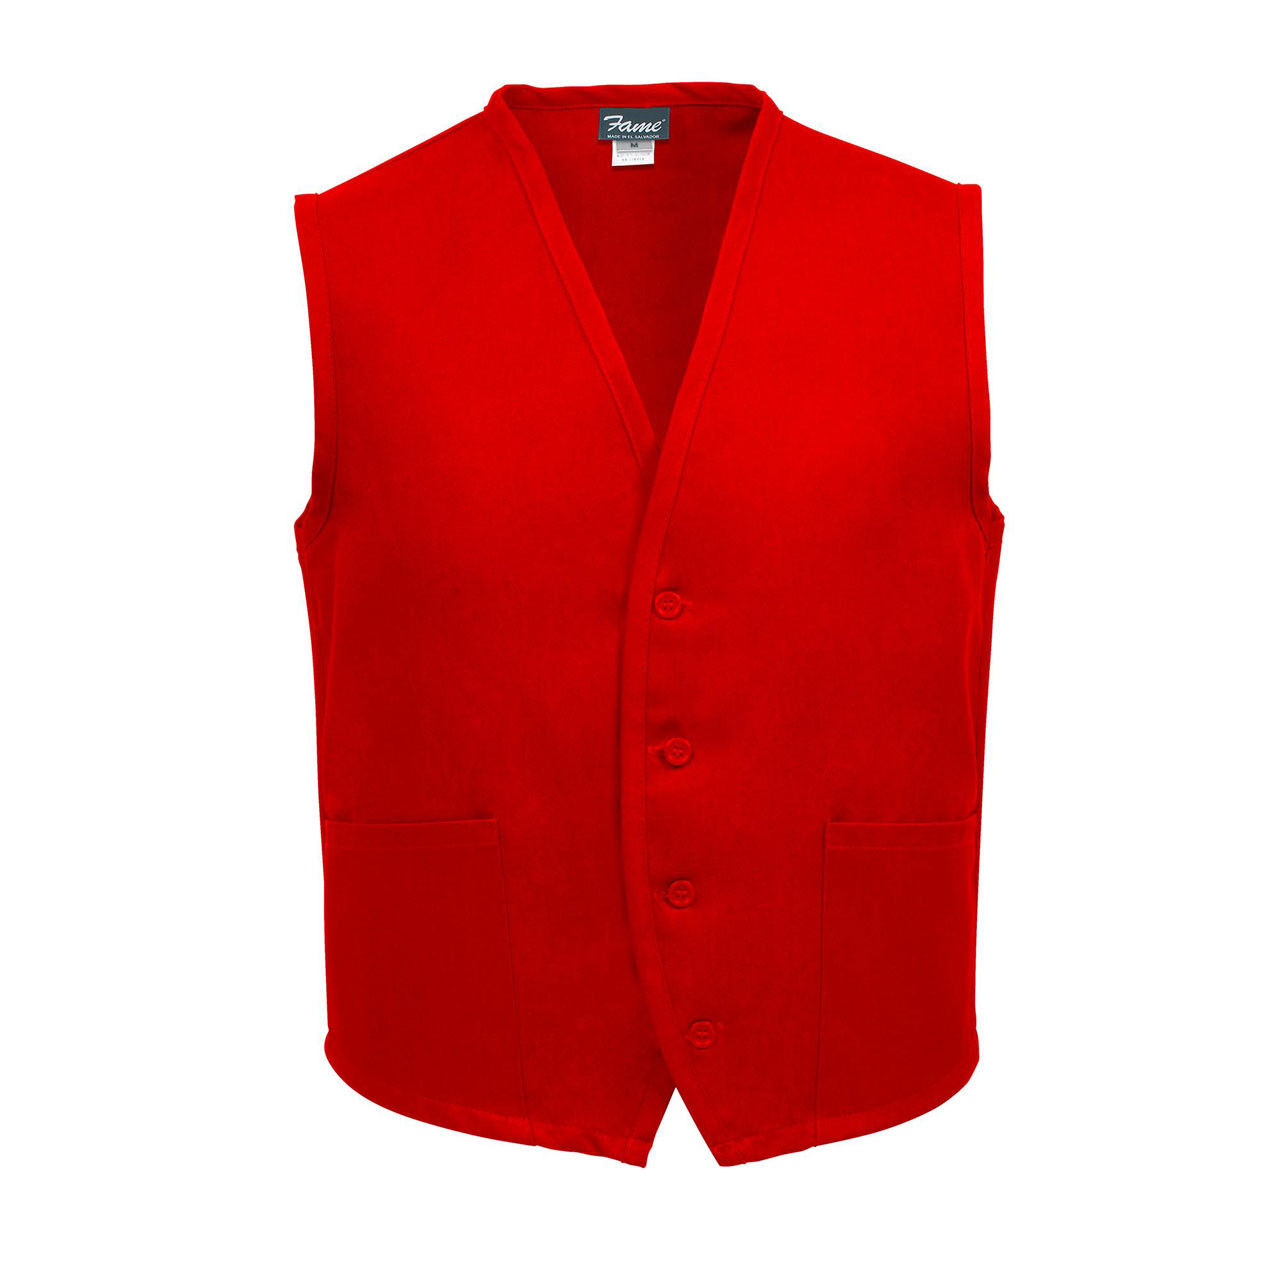 What is the material of the red vest used for the Unisex Uniform Vest?